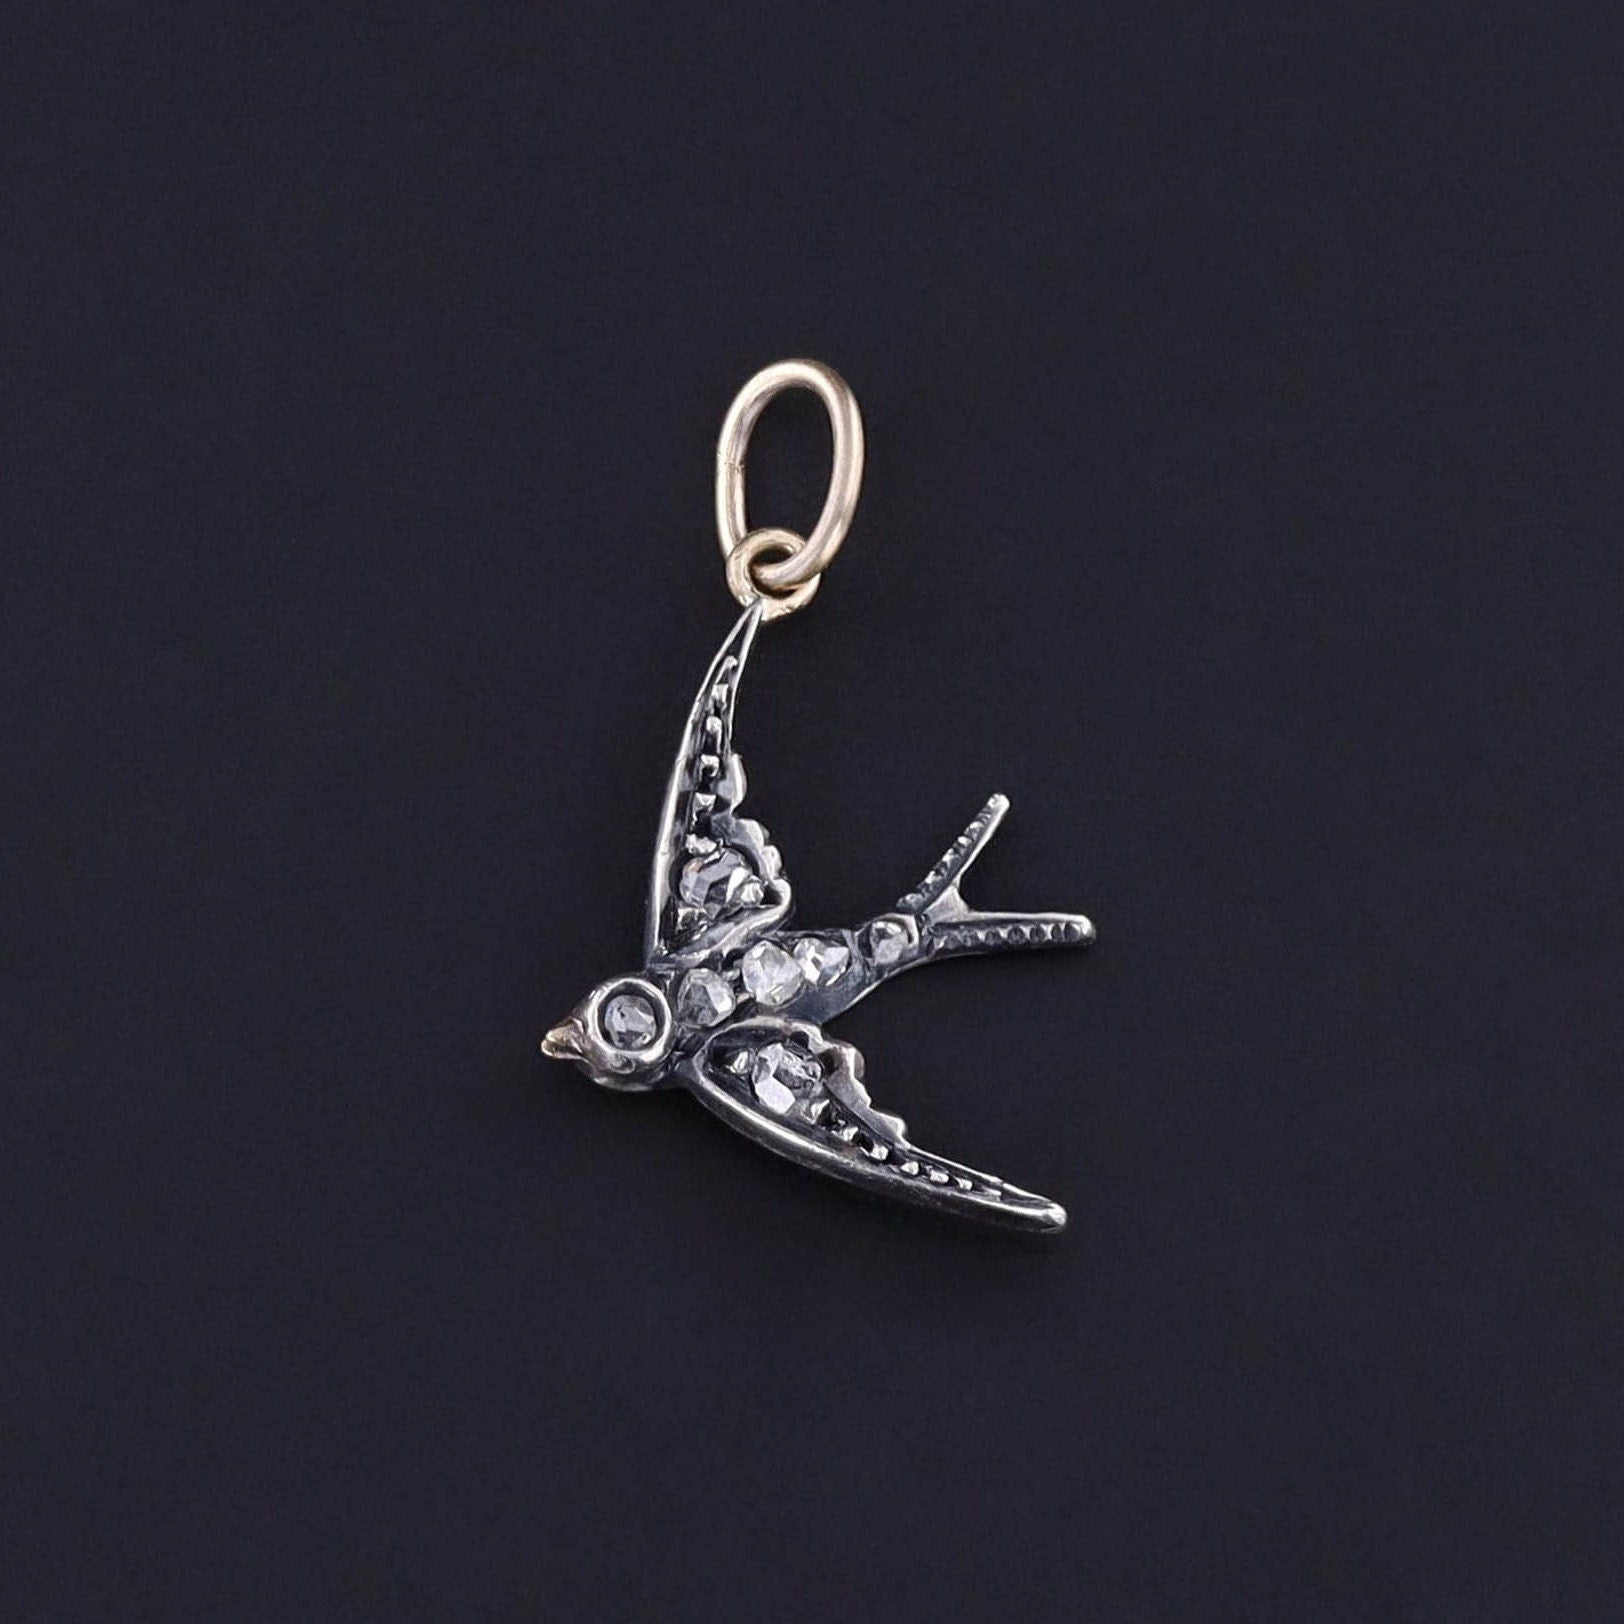 An antique diamond bird charm created from a brooch (circa 1890-1900). The piece was upcycled along with two other swallows. We turned the others into matching earrings. They are accented with rose cut diamonds.